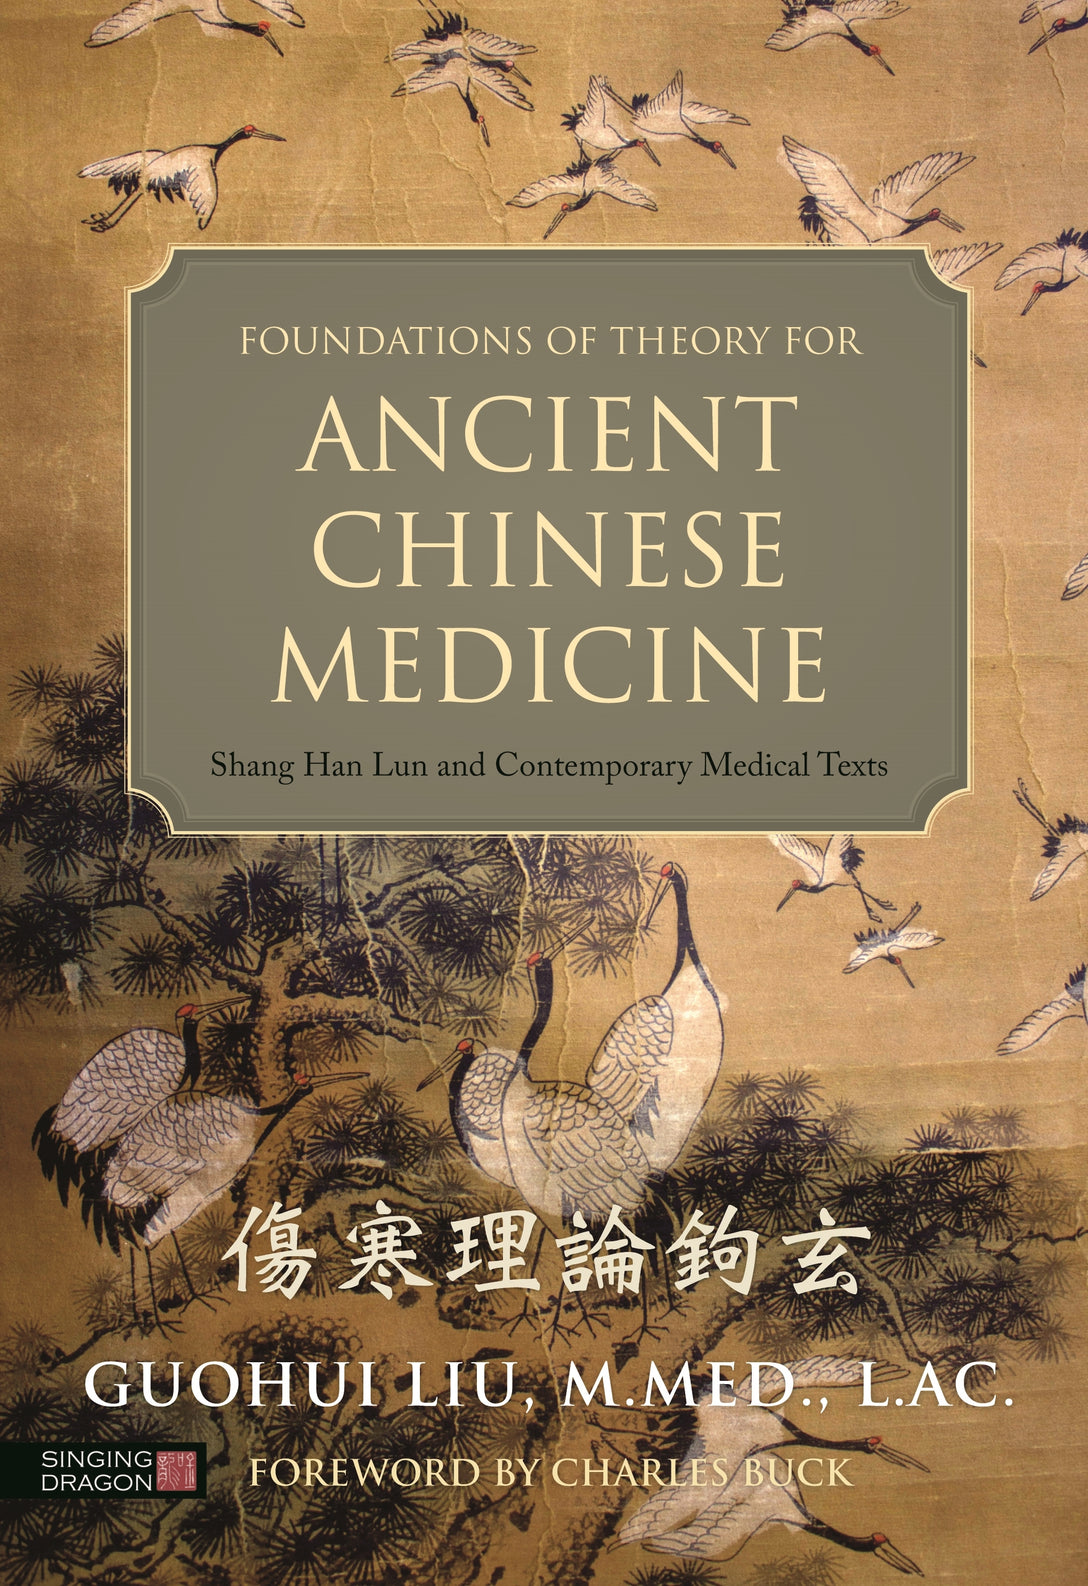 Foundations of Theory for Ancient Chinese Medicine by Charles Buck, Guohui Liu